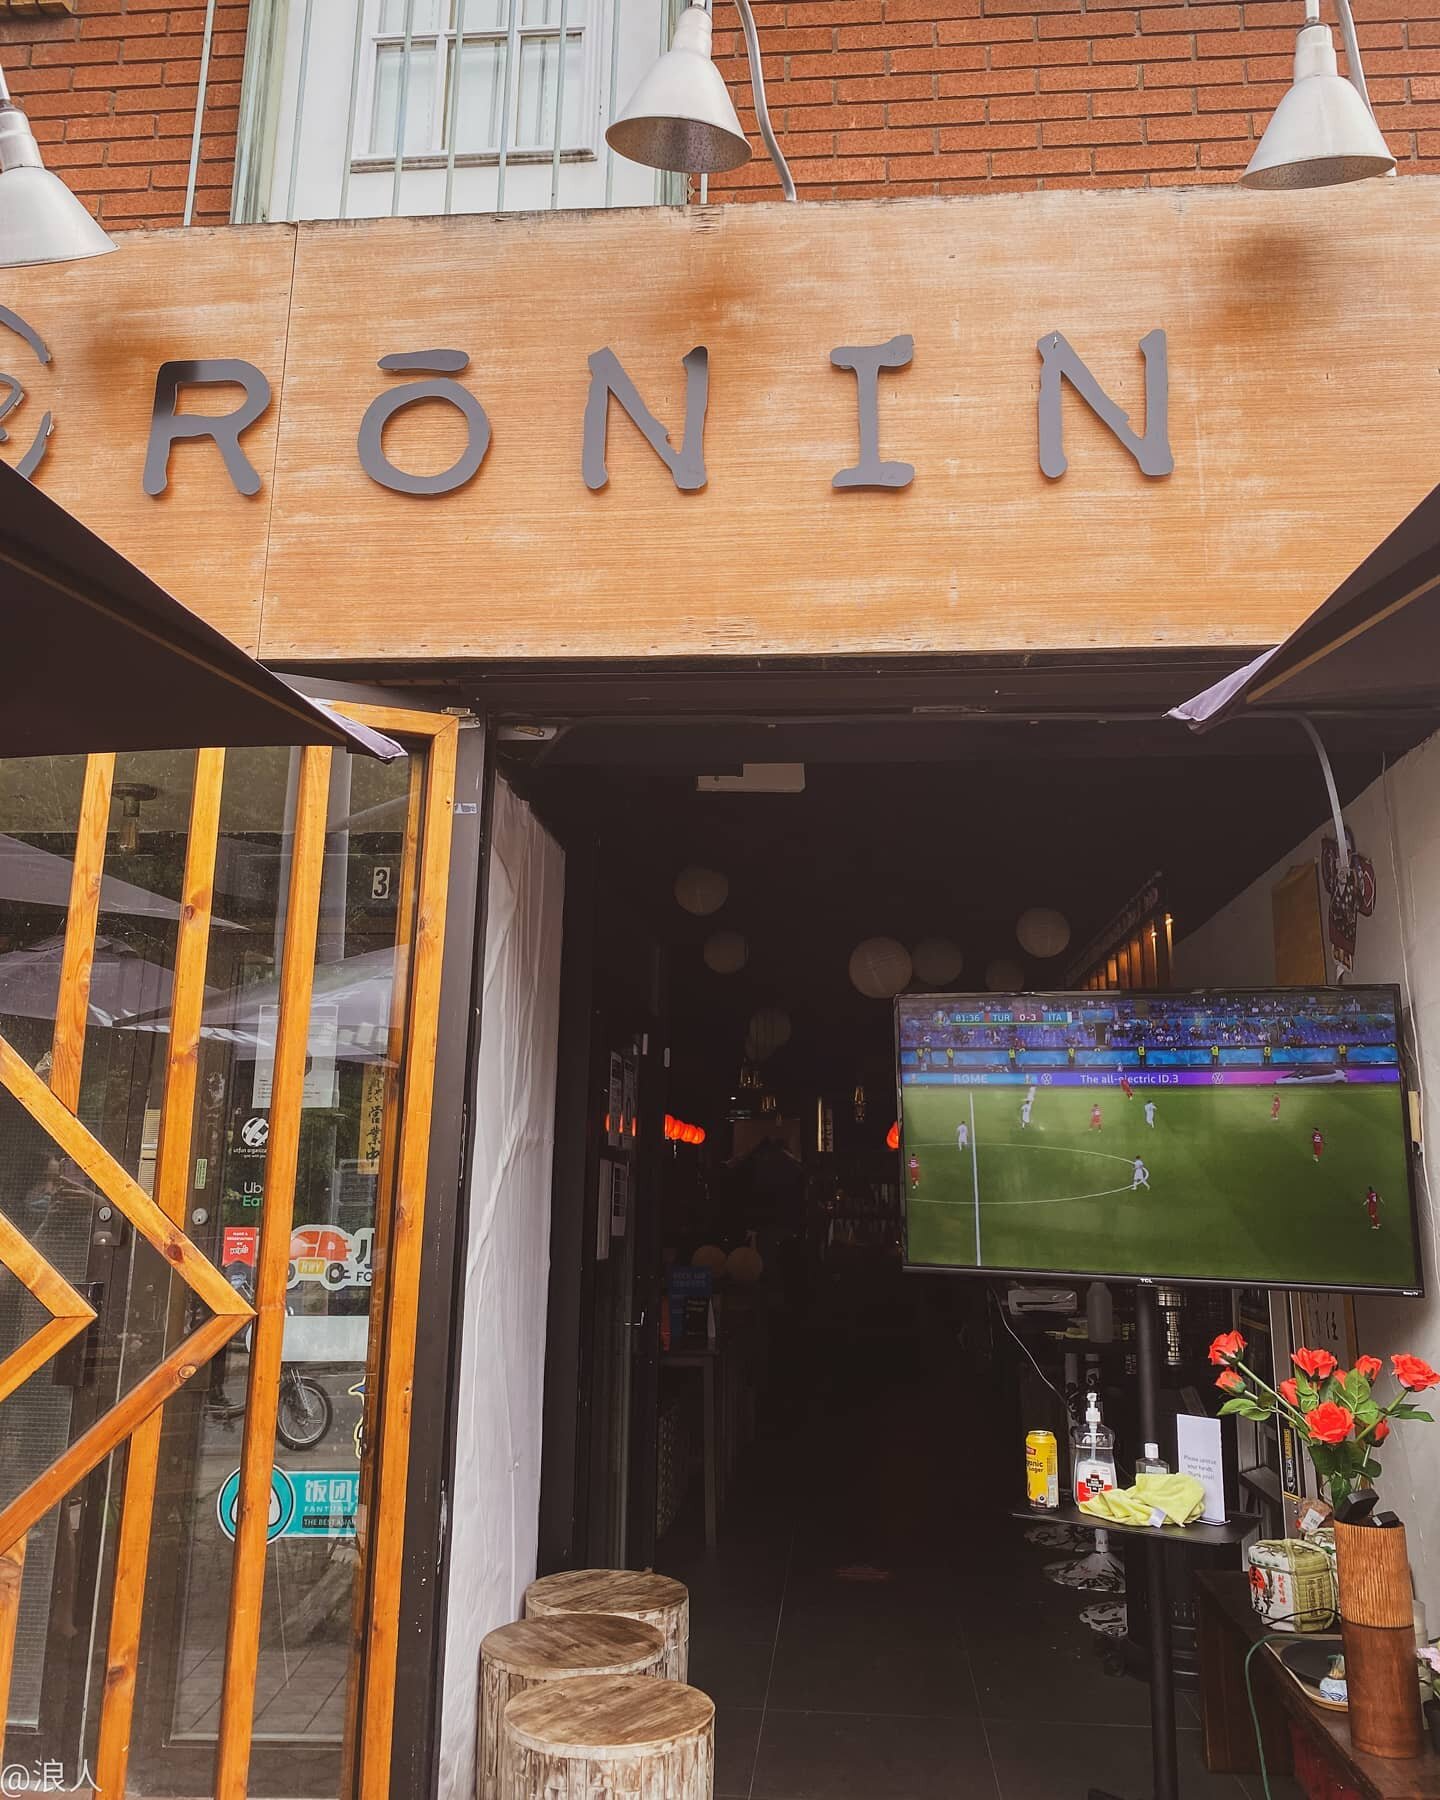 Who's ready for the Eurocup semi finals!?!?!?
At @ronin.izakaya , we got giant tv live streaming eurocup and delicious Asahi to go with the game! 
Patios are open for reservations, call ahead to book your spot!
.
.
.
#roninizakaya #torontoeats #toron